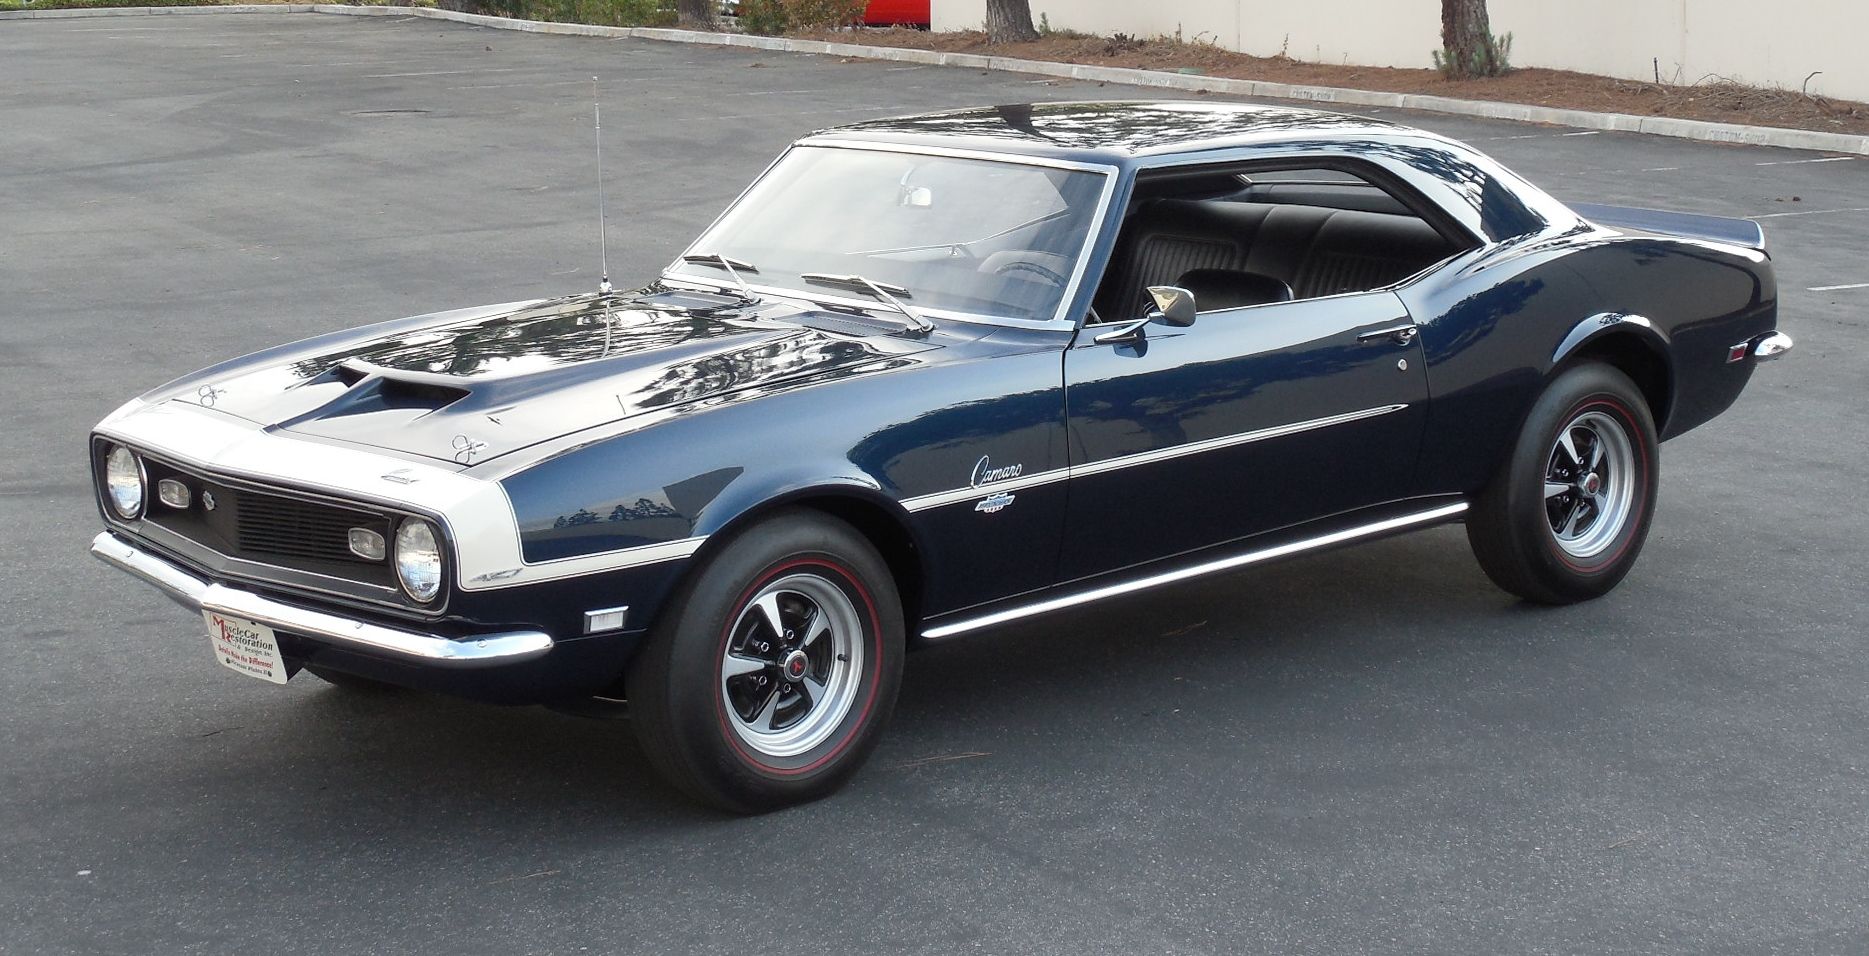 The Yenko Camaro in Fast and the Furious